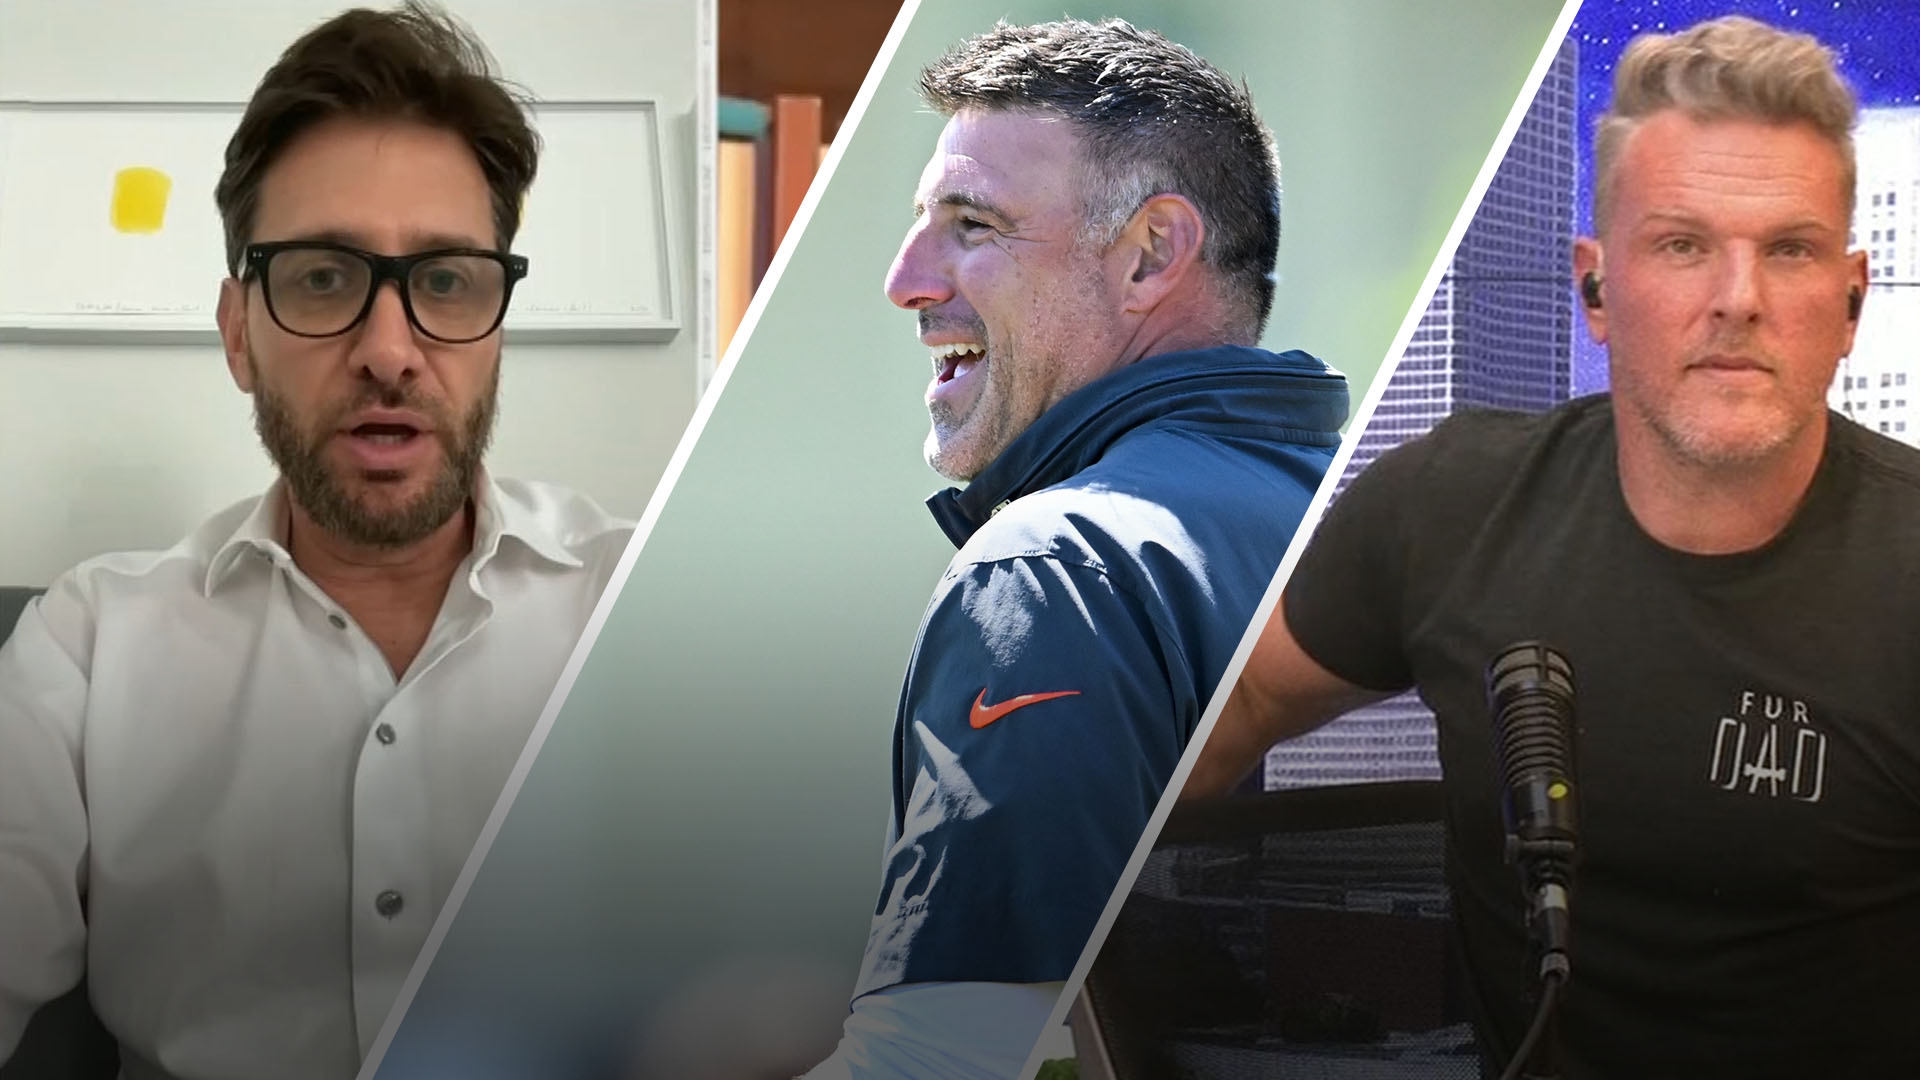 Greeny tells McAfee he would love Mike Vrabel to coach the Jets